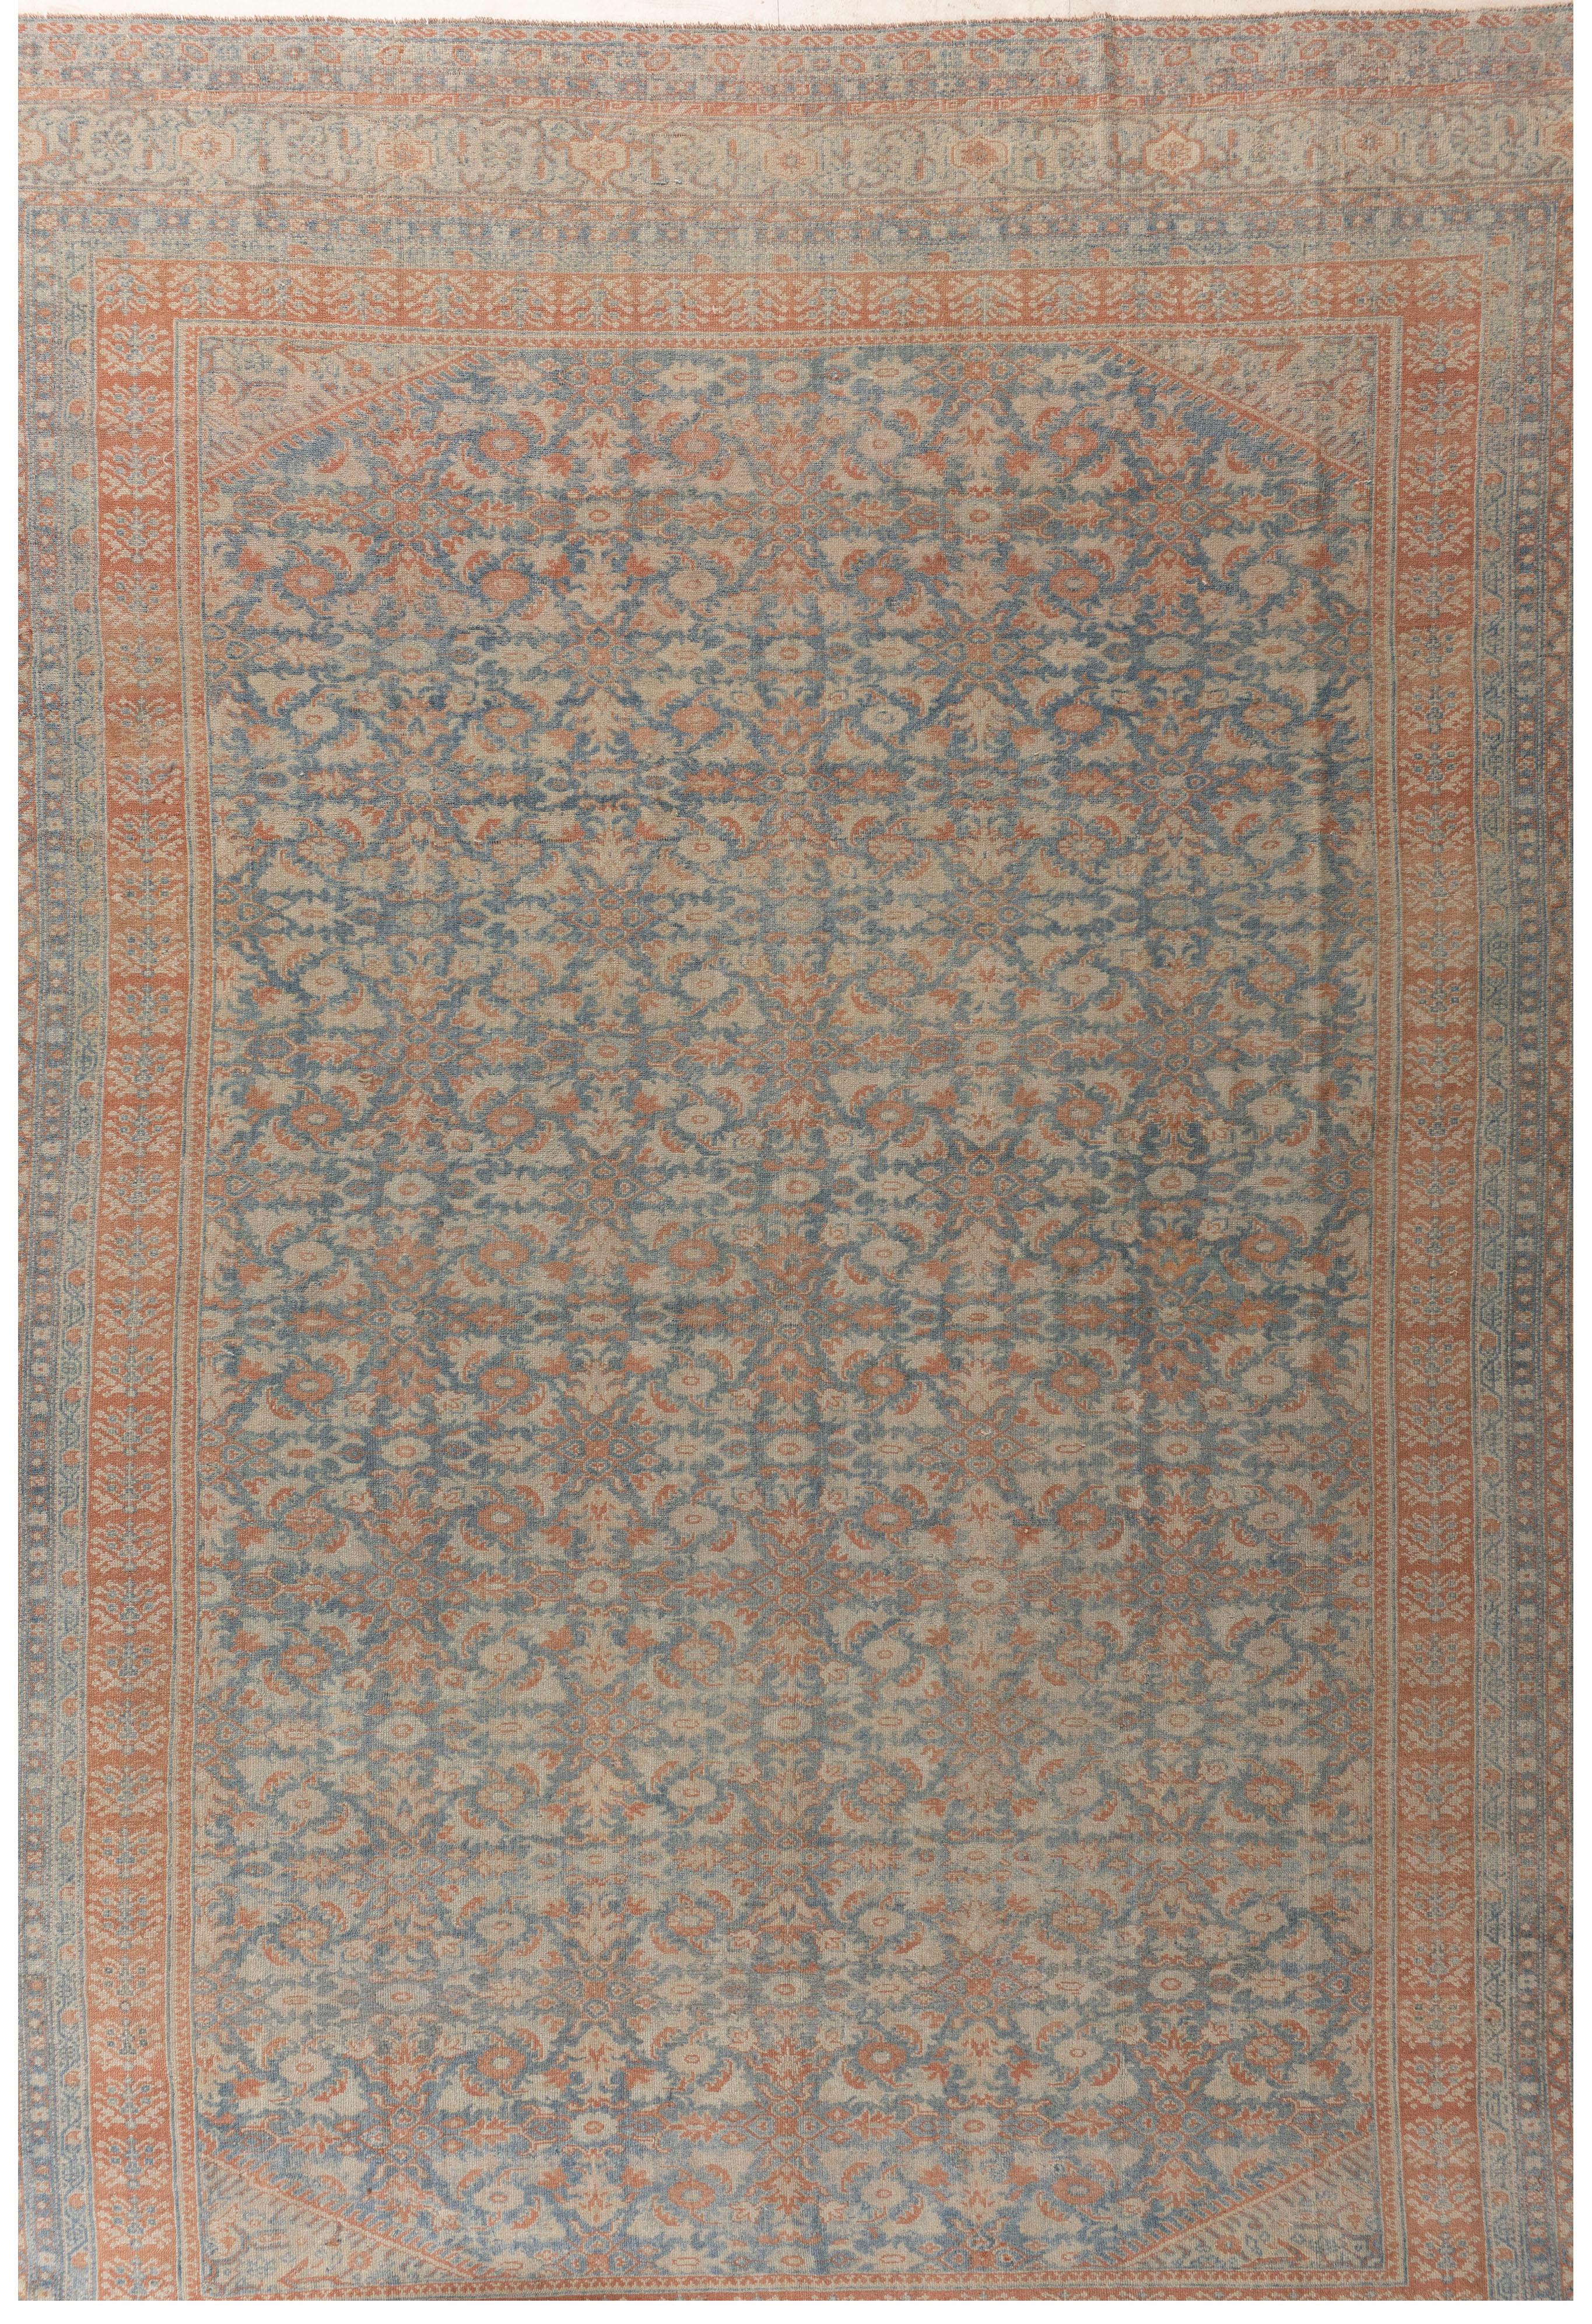 20th Century Vintage Persian Bibikabad Rug 10'6 x 13' For Sale